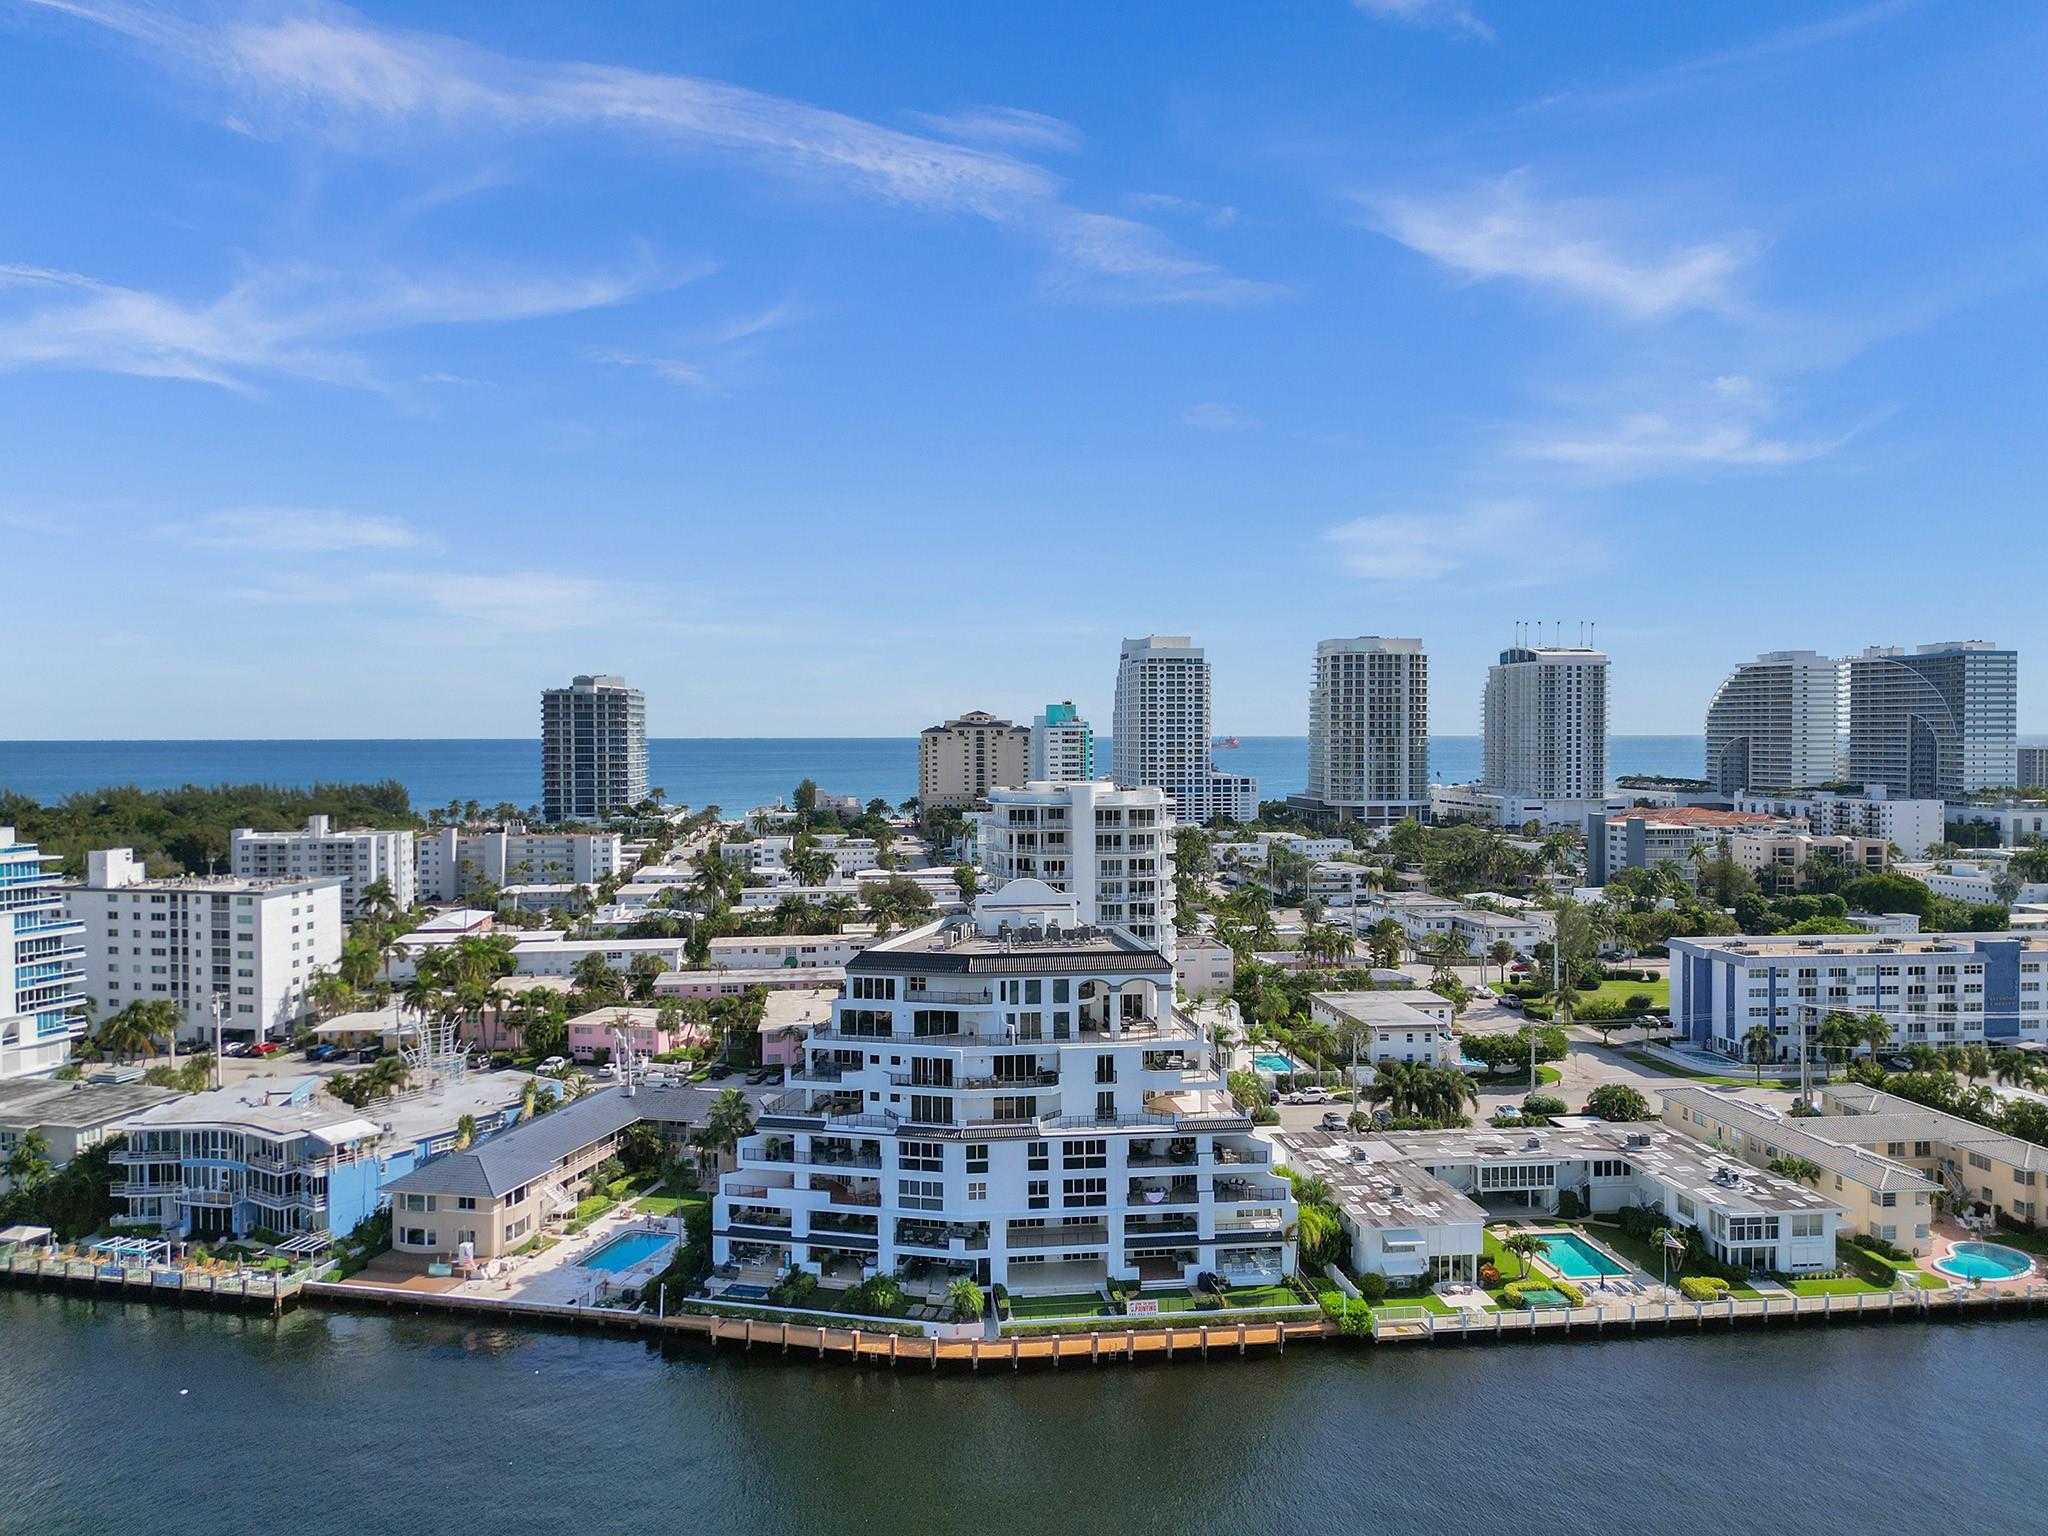 Rarely available 3 BR, 3 BA waterfront condo in highly desirable La Cascade! Large unit w/ open floor plan featuring a 600+SF covered balcony w/ built-in TV & electric fireplace w/ panoramic intracoastal waterway views...perfect for entertaining! Huge kitchen w/ stainless appl, bar area & tons of storage space! Floor-to-ceiling impact glass allows for stunning water & downtown Ft. Lauderdale skyline views! Travertine flooring on the diagonal & automatic shades inside & out! Spacious primary BR w/ balcony access & bathroom w/ dual sink vanity & jacuzzi tub! 2 covered parking spaces! New 2021 A/C, 2 tankless hot water heaters & full-sized front loading W/D in unit! Ring doorbell & cameras! Day dock for your boating needs! Pet friendly & short walk to beaches, restaurants & more! Must see!